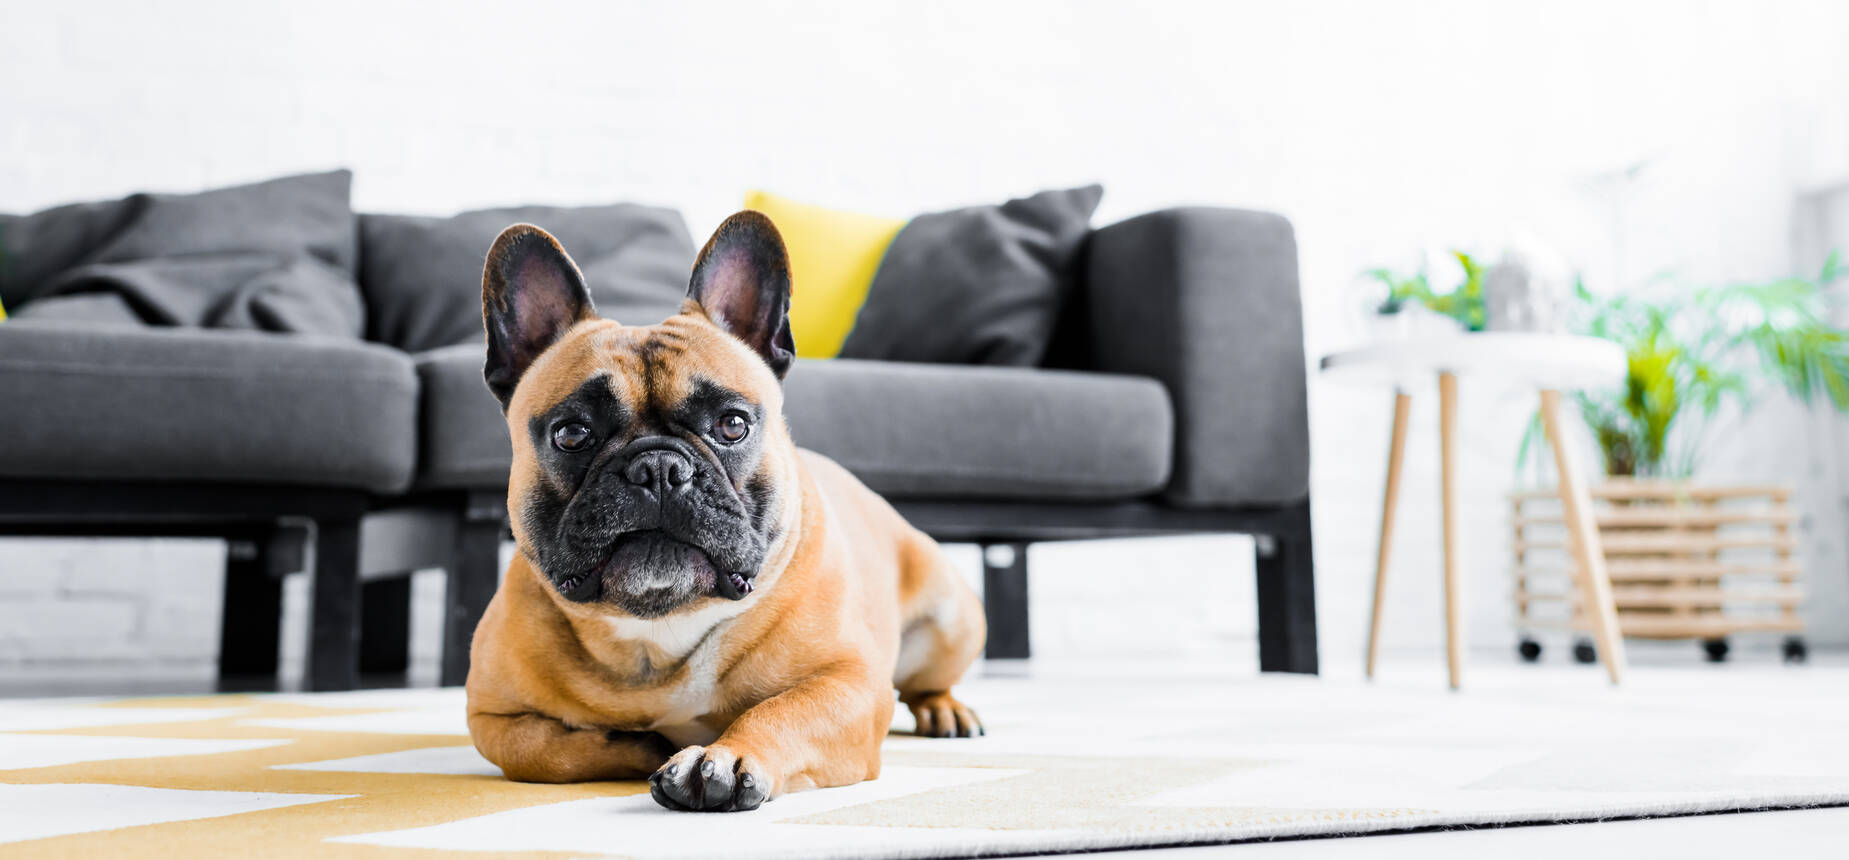 Cute French Bulldog Lying On Floor In Living Room Contemplating Transforming Student Loan Debt Into Home Equity